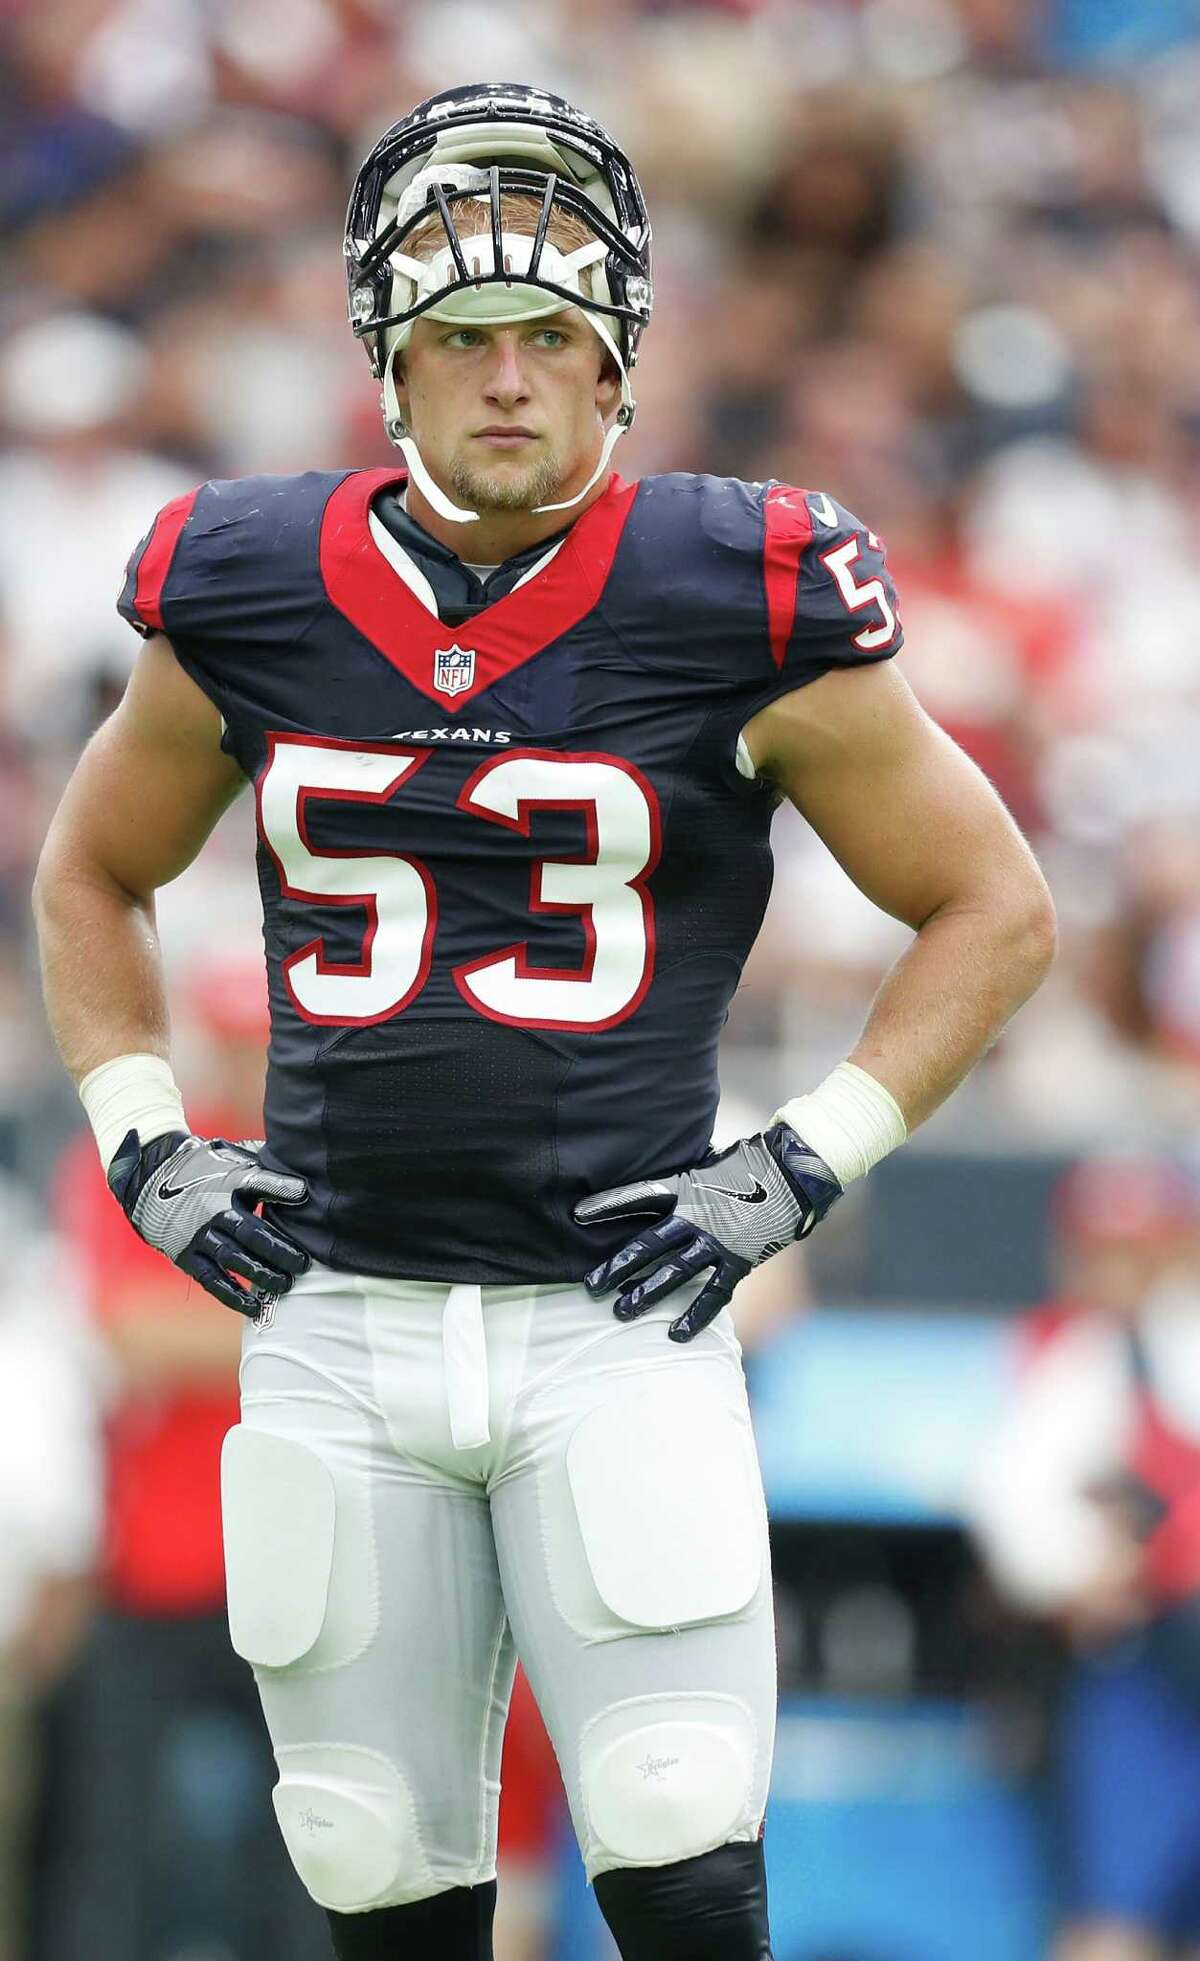 Houston Texans inside linebacker Max Bullough (53) during a time out in the second quarter of an NFL football game at NRG Stadium, Sunday, Sept. 18, 2016 in Houston.